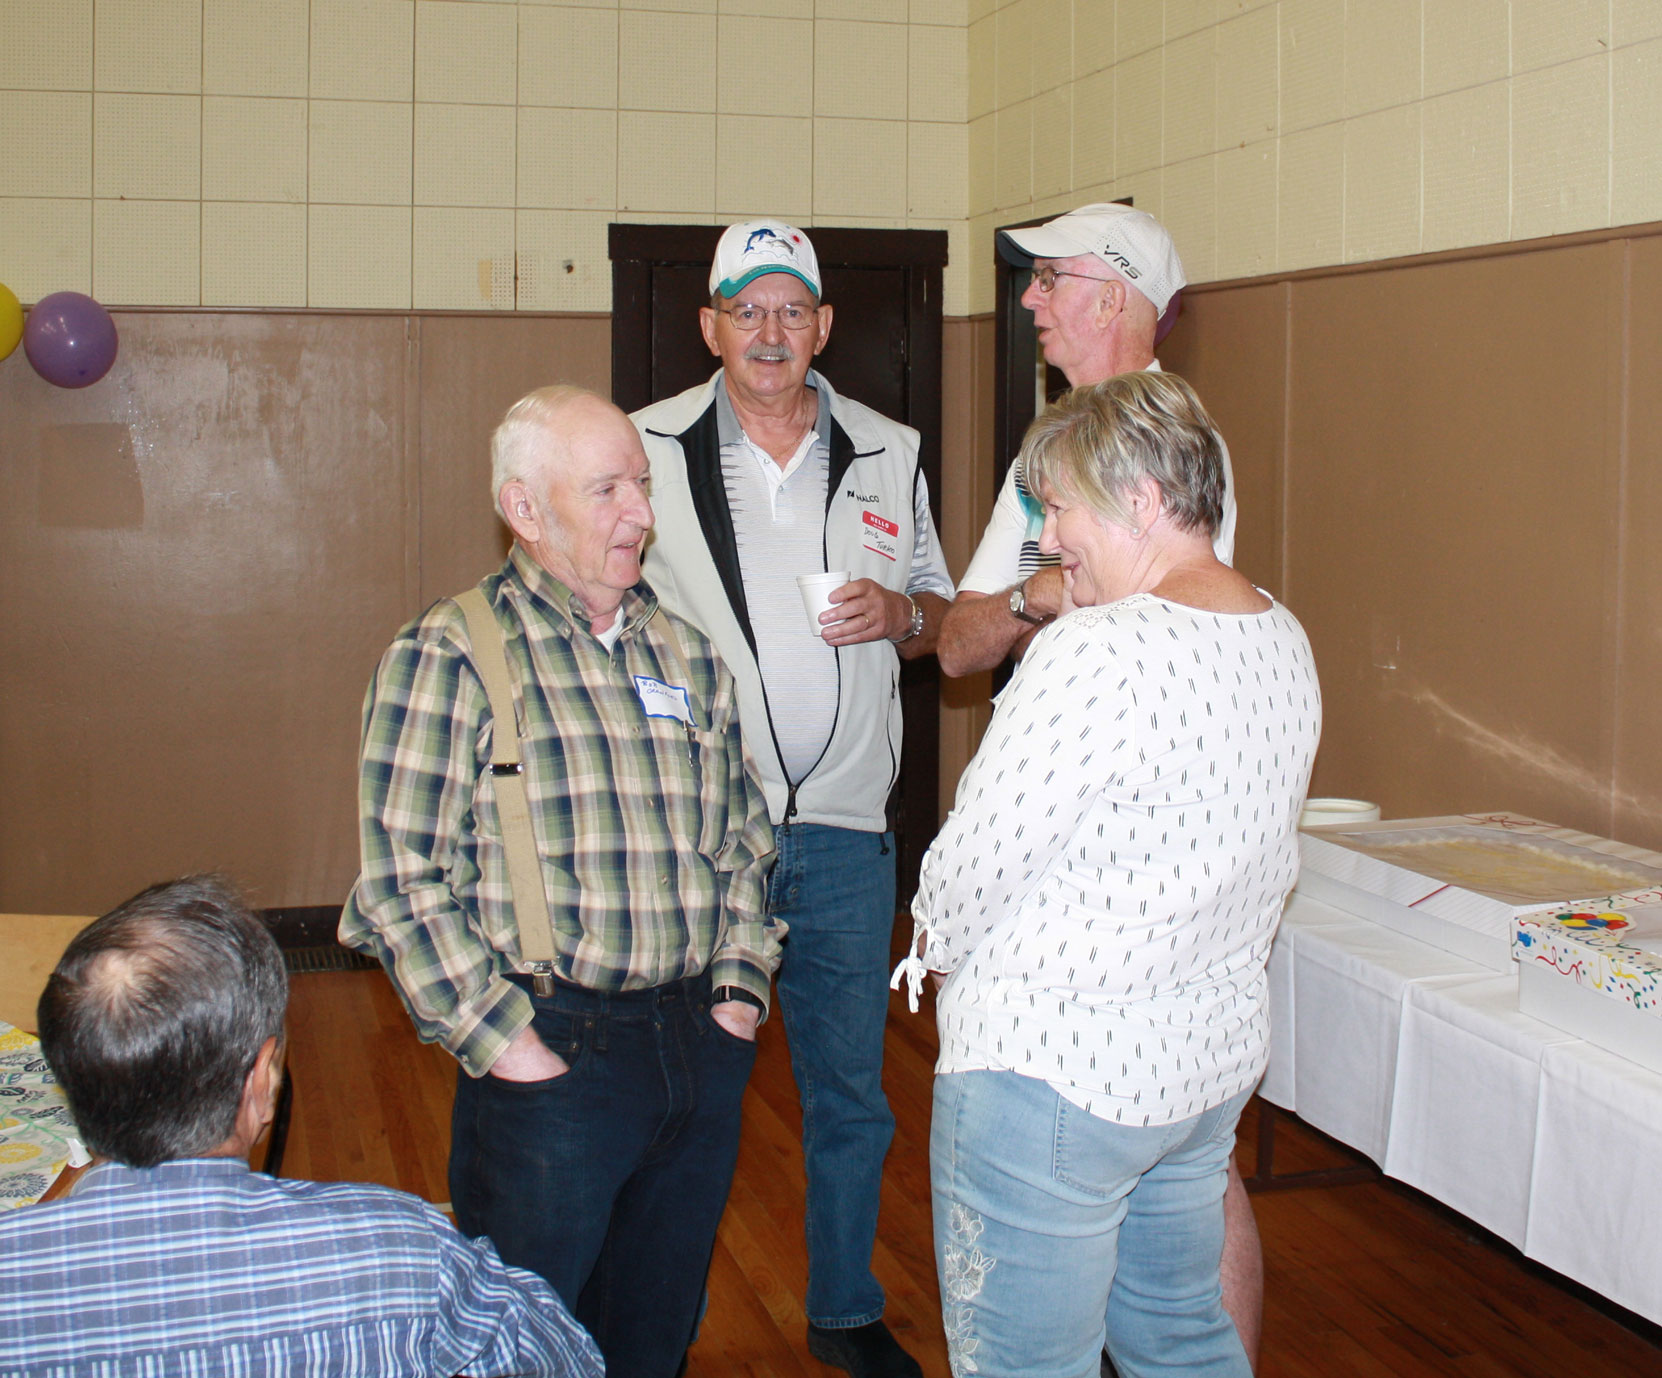 Bob Crawford at the Hillcrest Lumber Co. Employees Reunion in May 2018. (photo courtesy of Cecil Ashley)